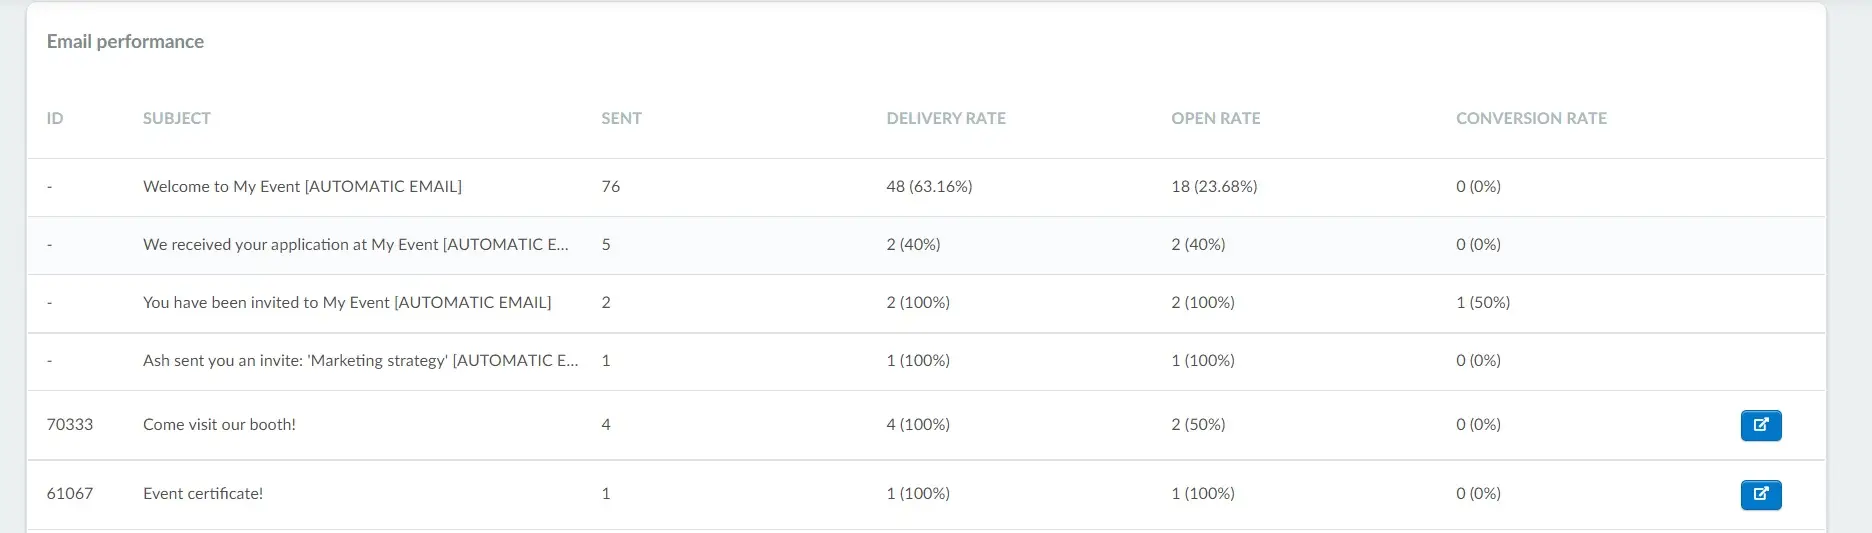 Email performance: check the analytics for one specific email